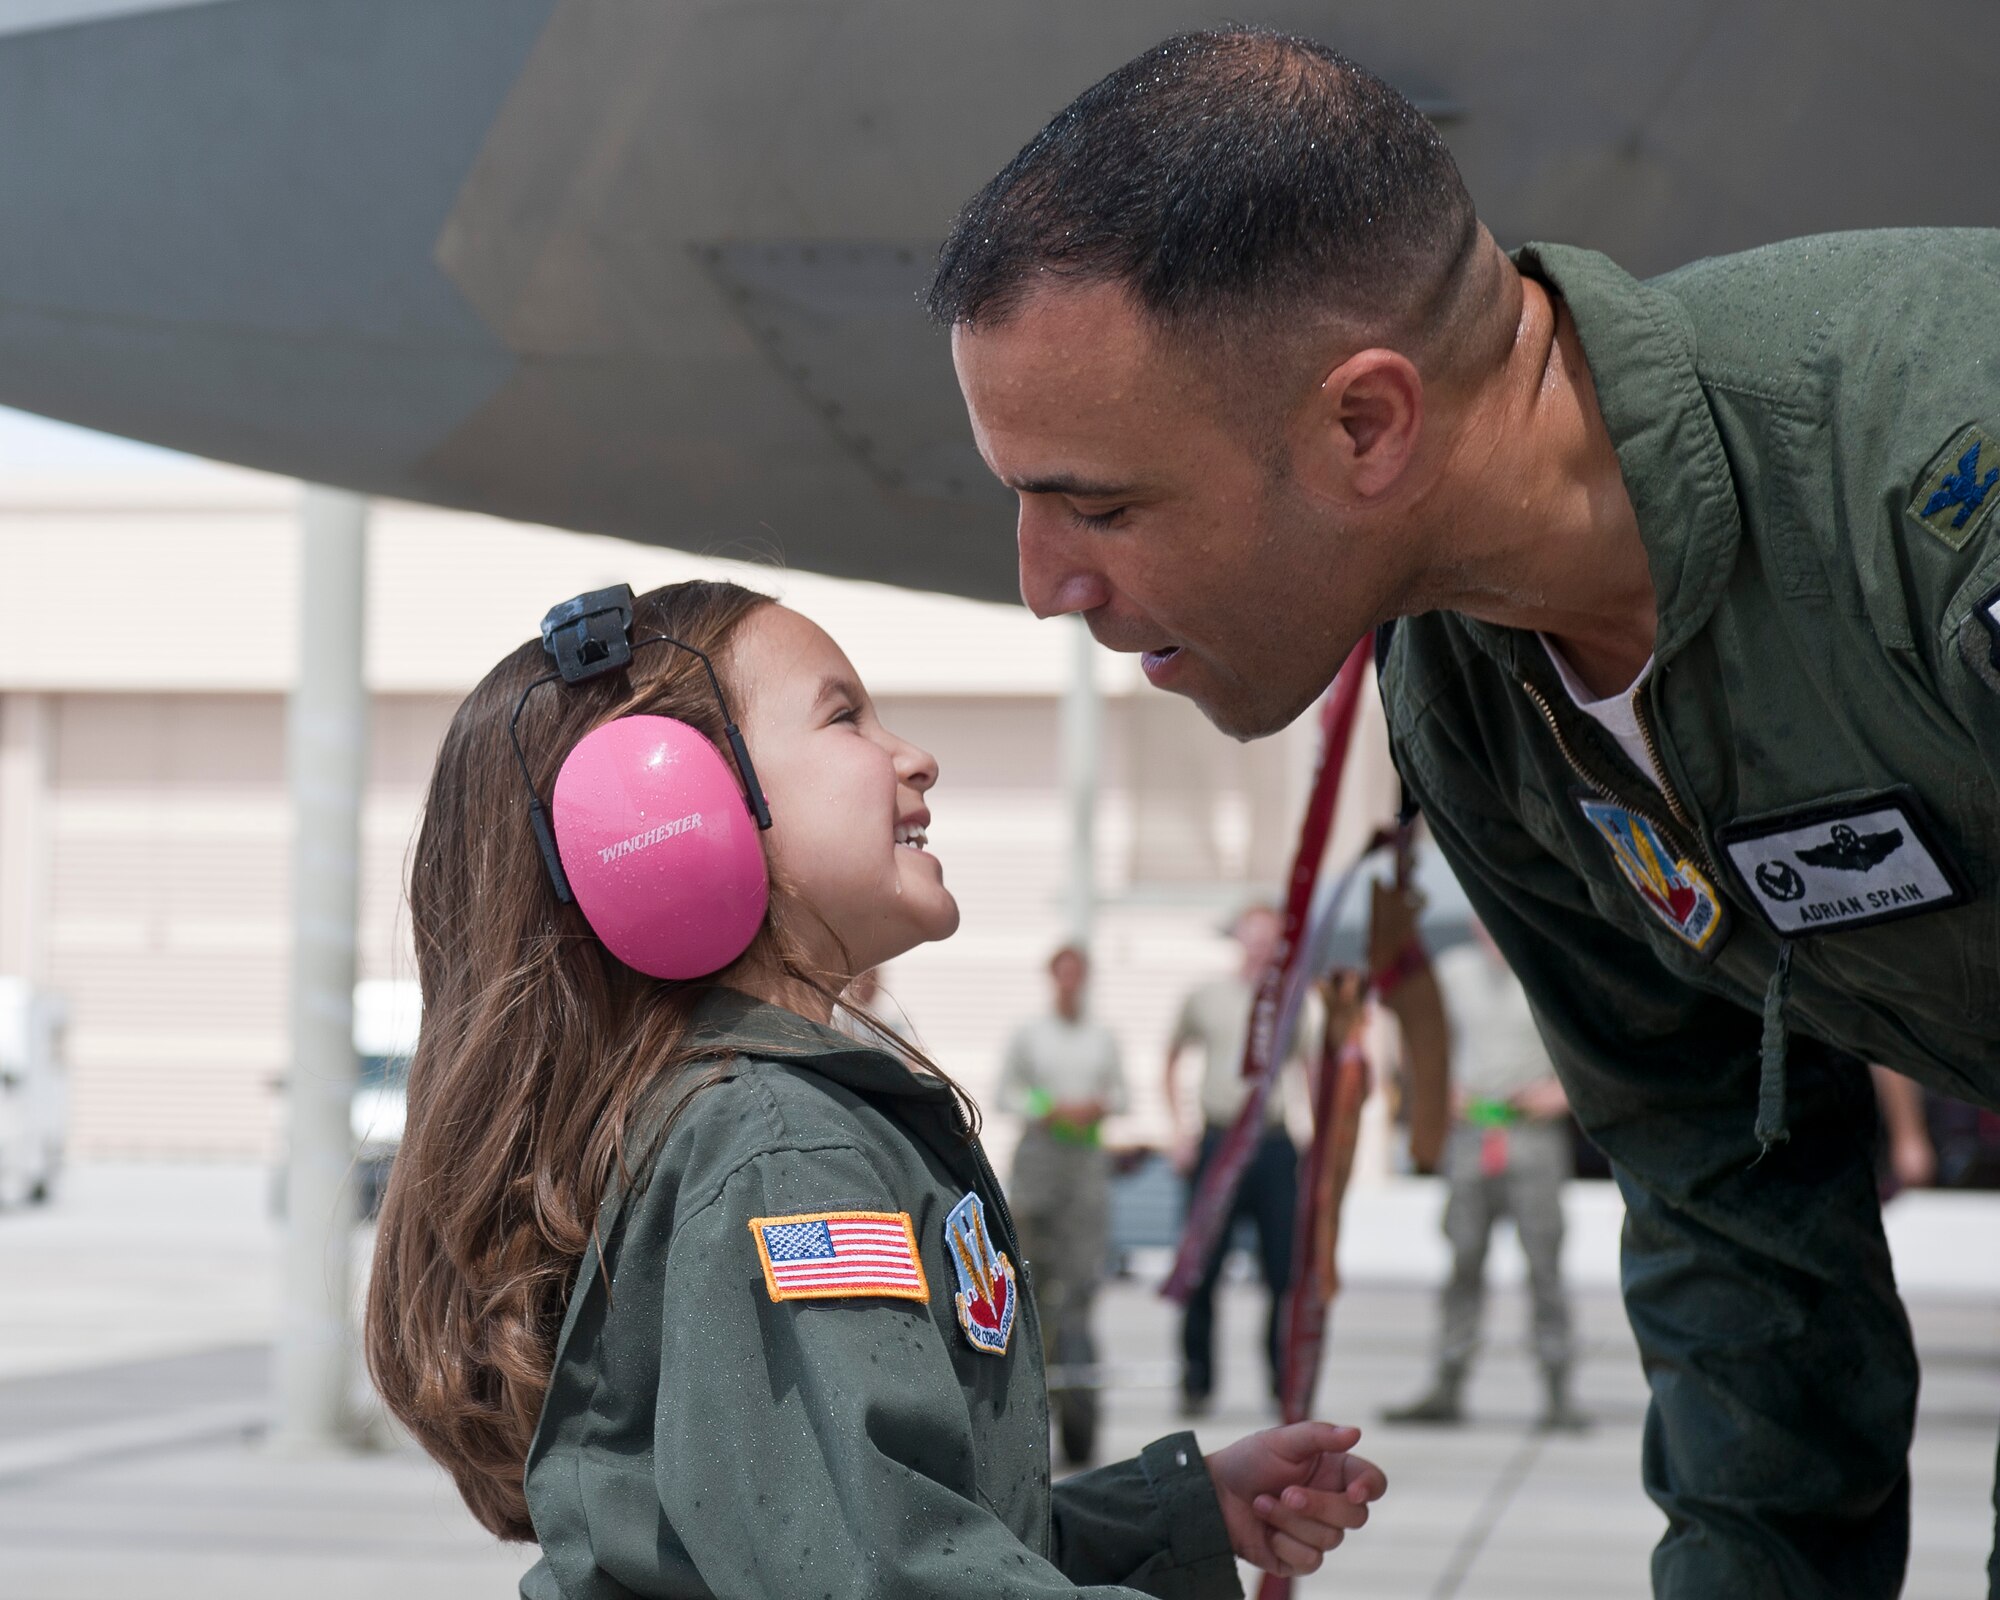 Col. Adrian Spain, U.S. Air Force Weapons School commandant, attempts to kiss his daughter after his final flight as the USAFWS commandant at Nellis Air Force Base, Nev., May 11, 2015. Spain’s family was on hand to congratulate the outgoing USAFWS commandant on a successful tour at Nellis AFB. (U.S. Air Force photo by Staff Sgt. Siuta B. Ika)